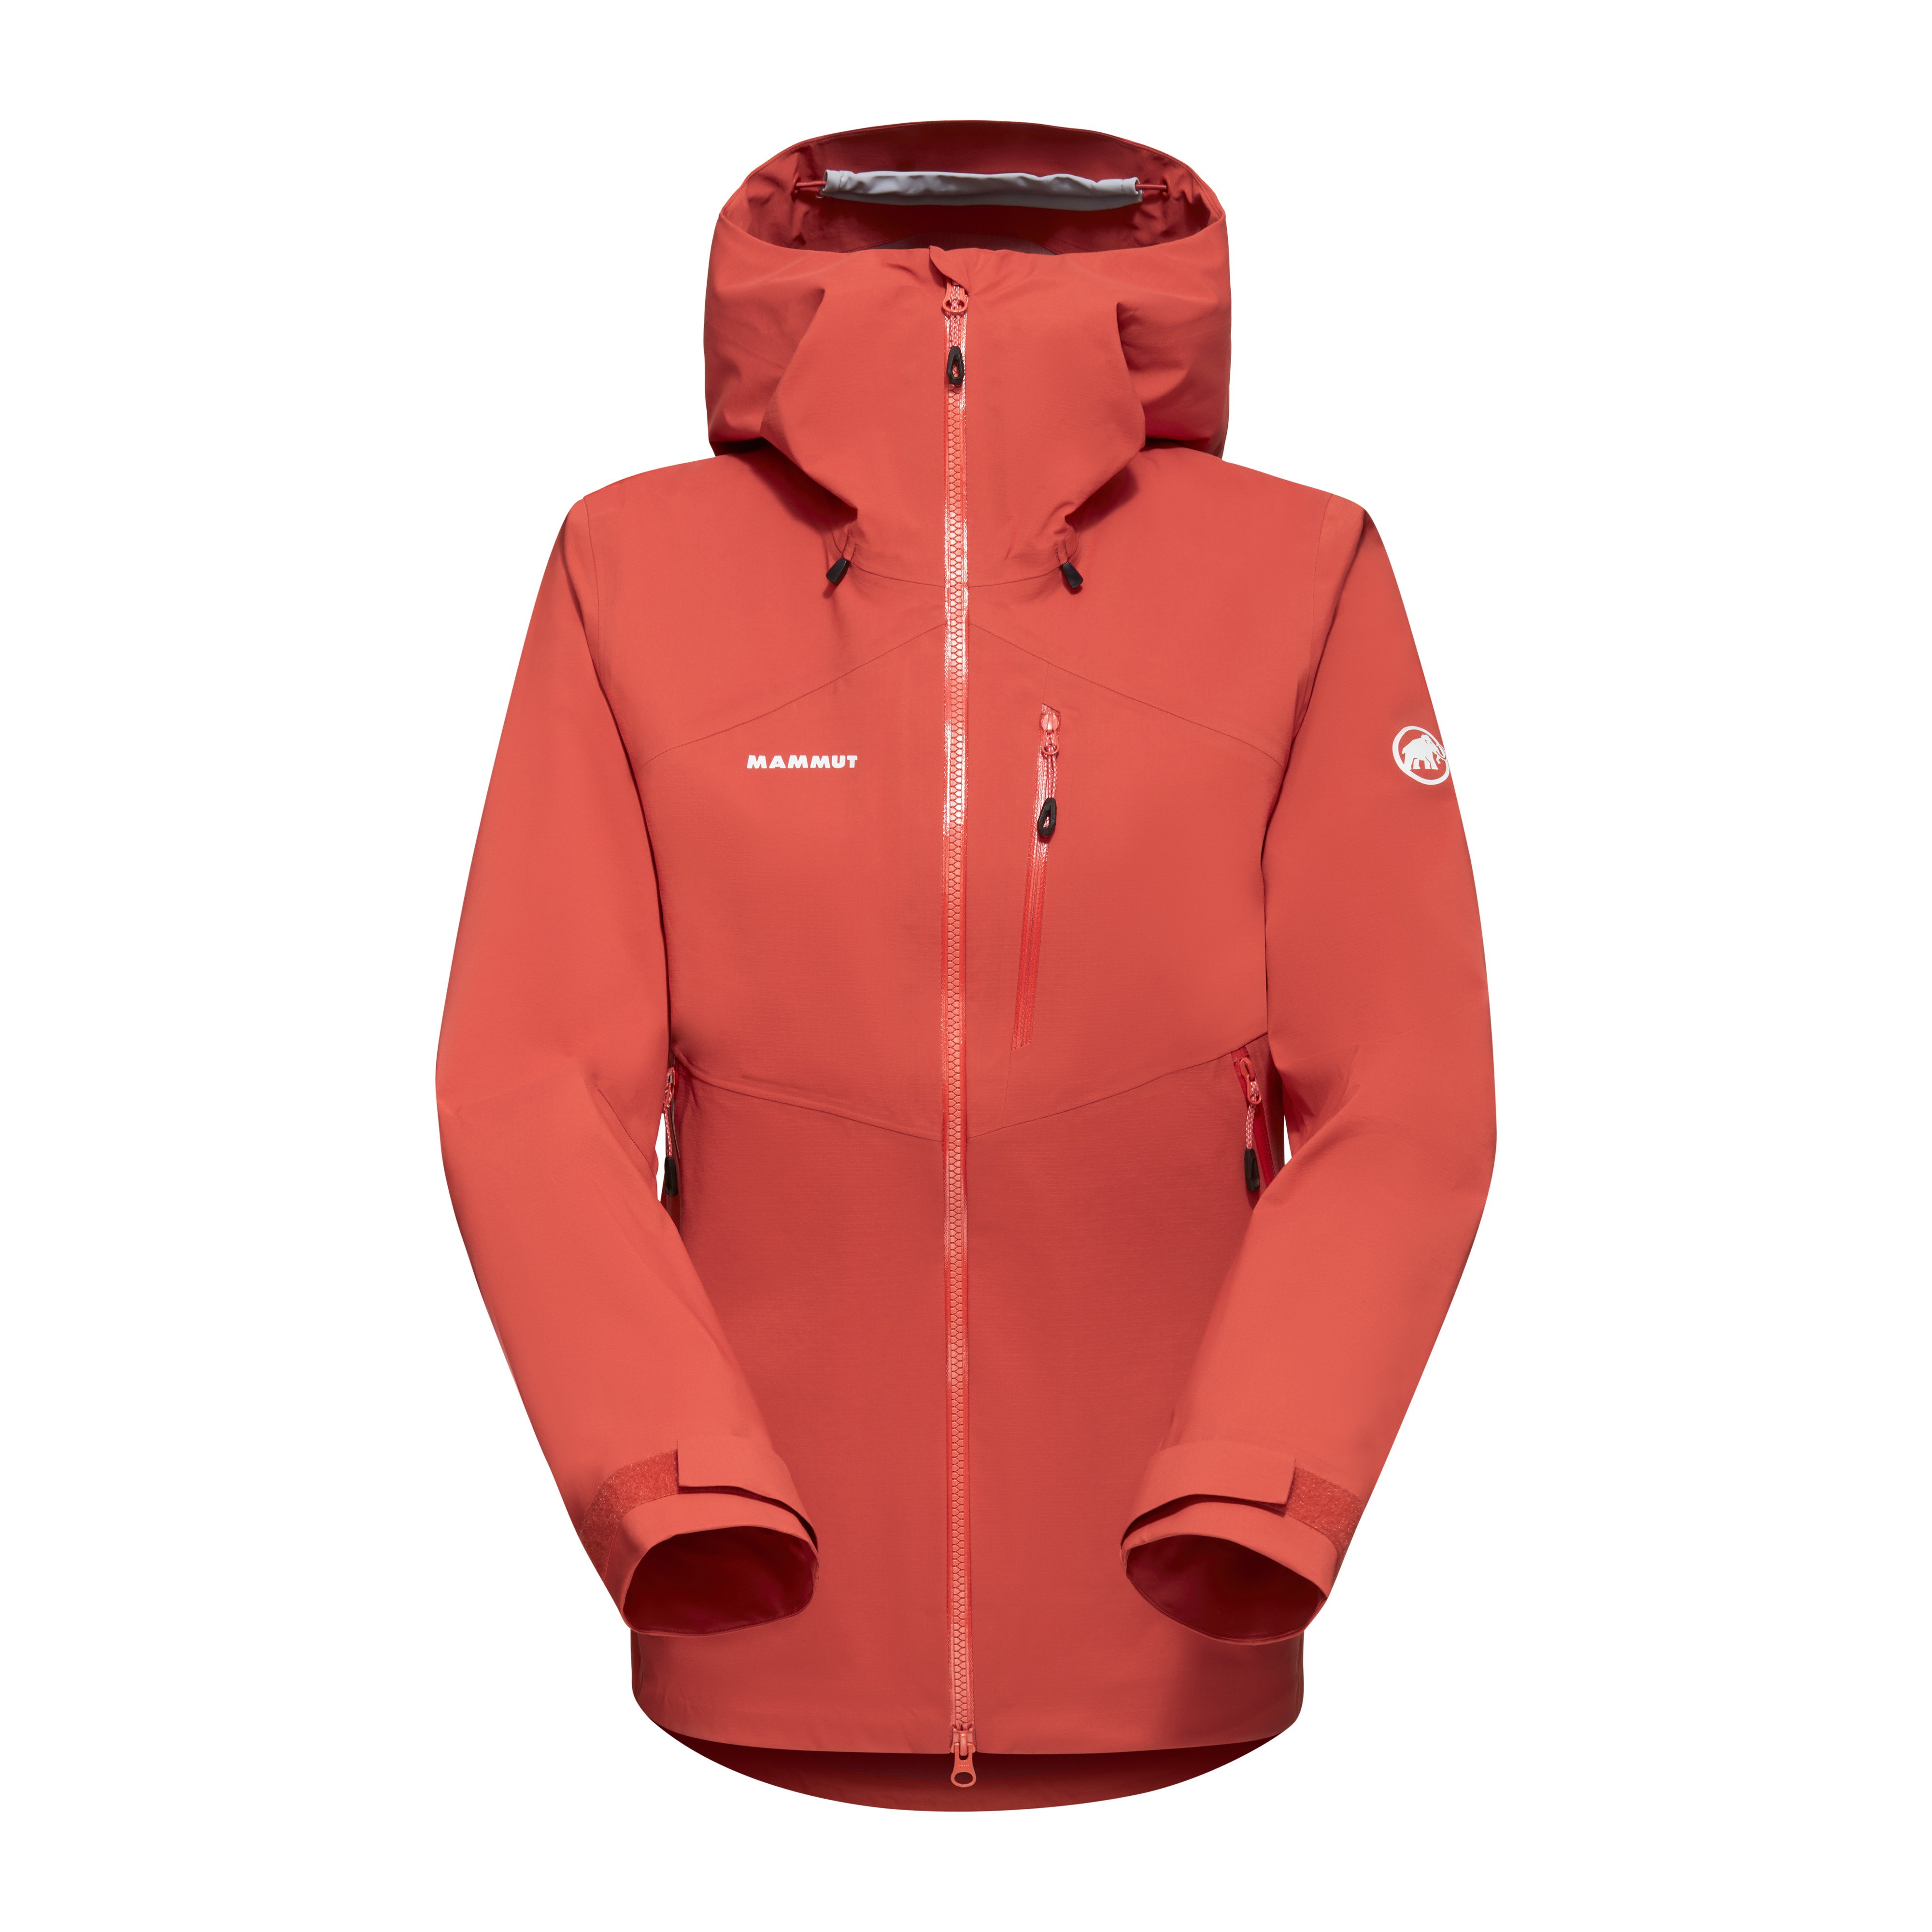 Alto Guide HS Hooded Jacket Women - terracotta, M product image